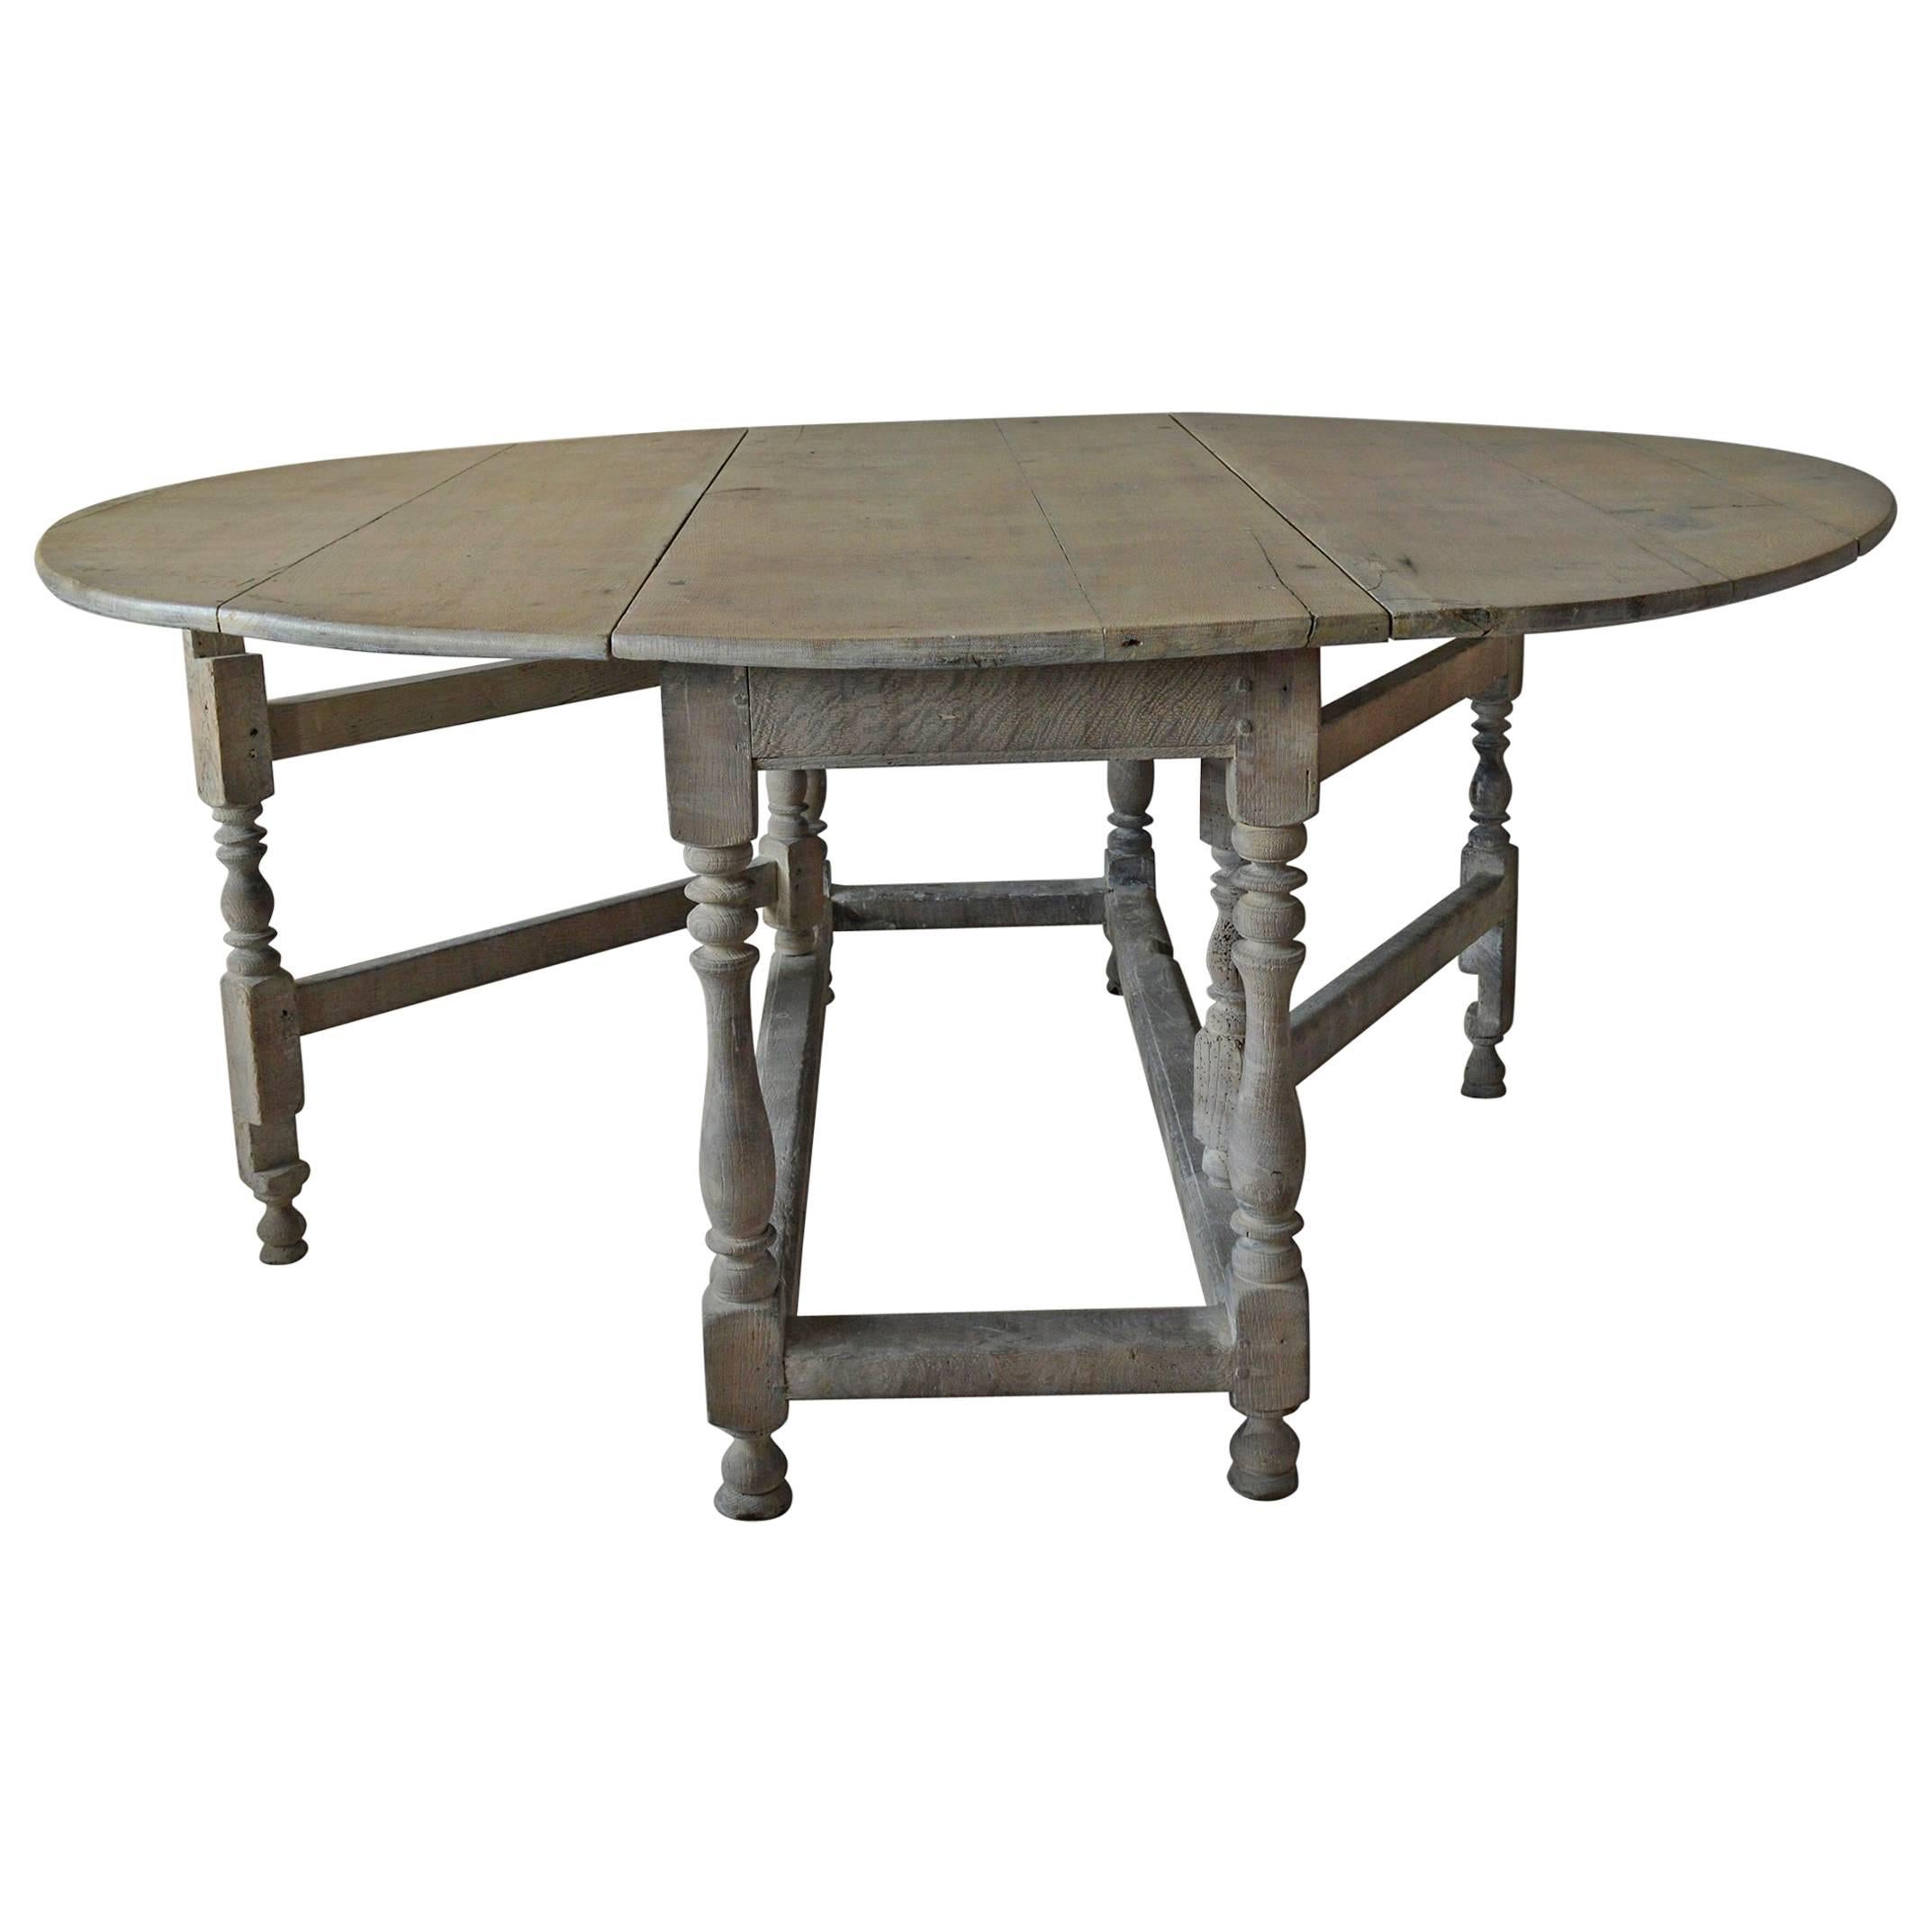 Large Antique Limed Oak Round or Oval Dining Table, English, 18th Century